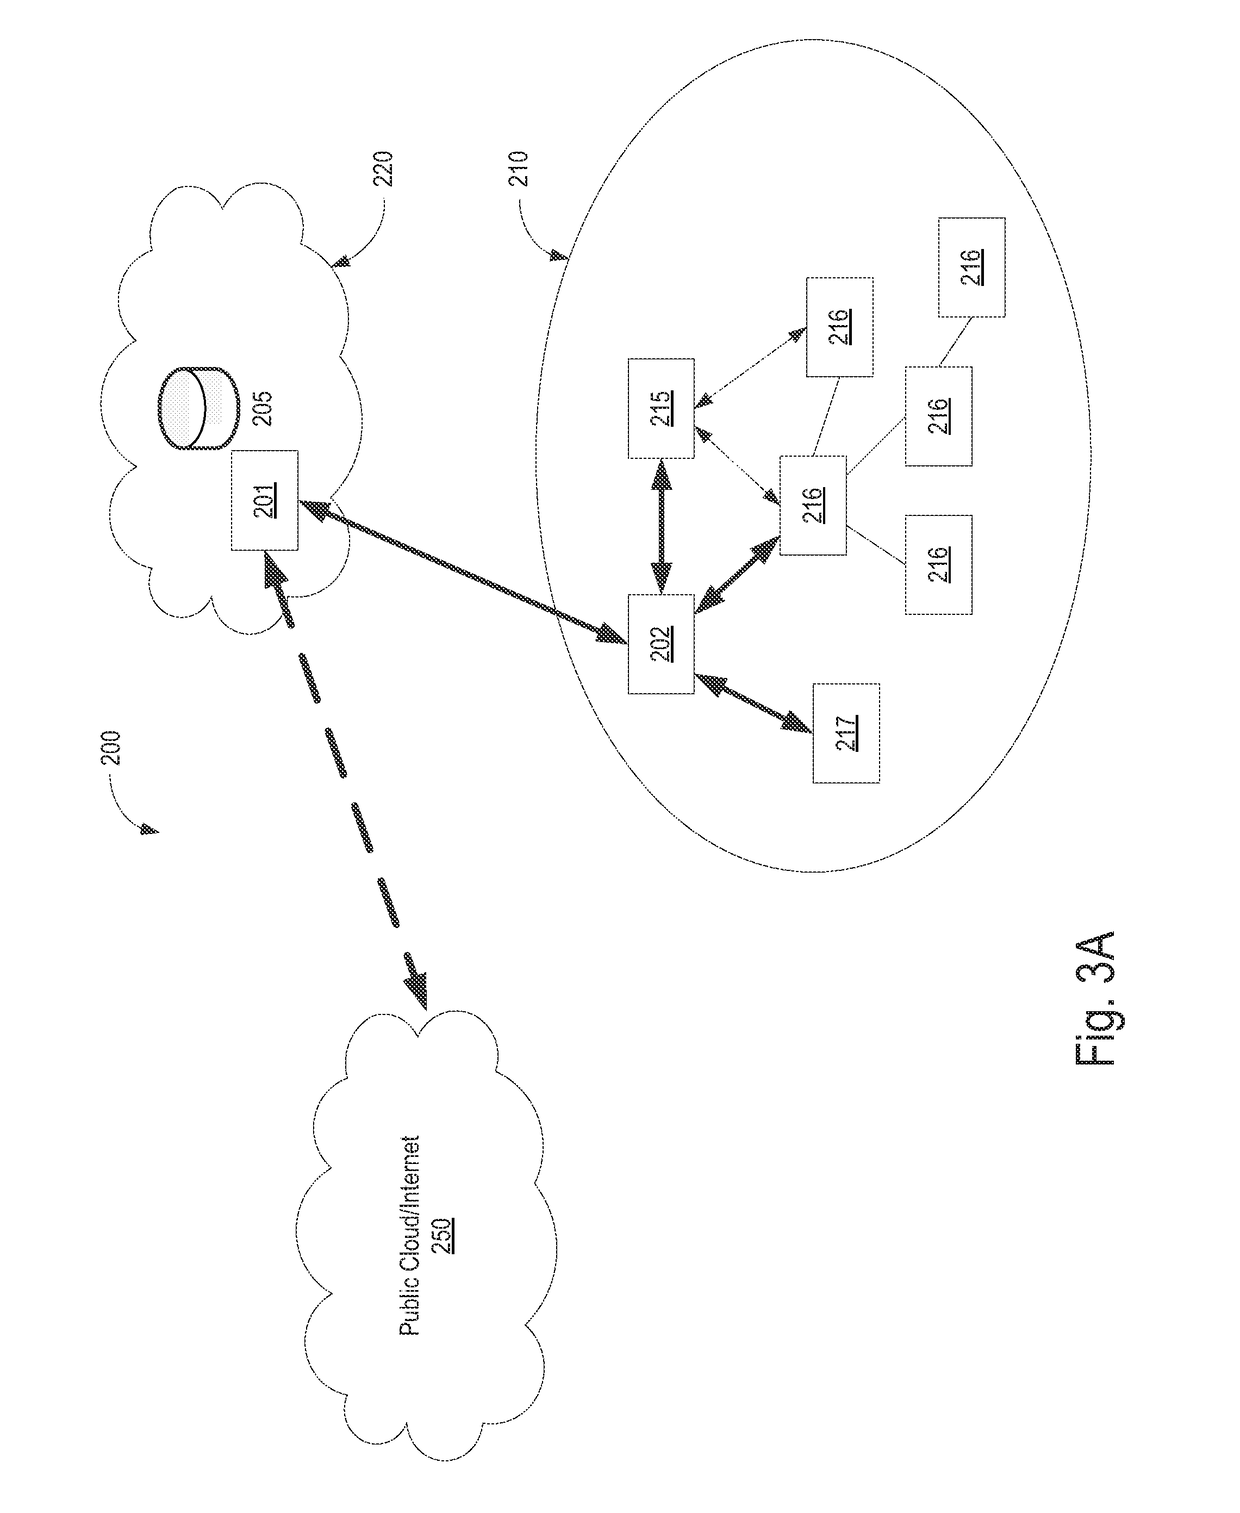 System and method for client network congestion detection, analysis, and management